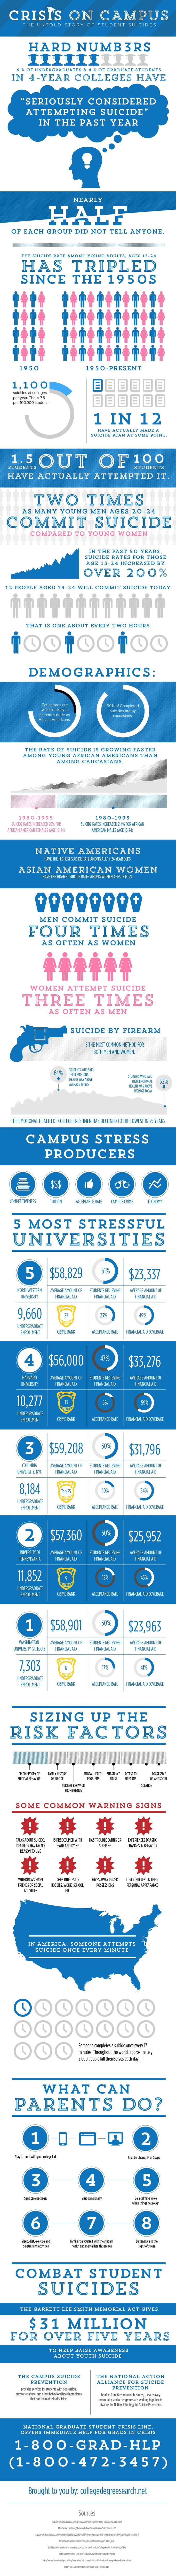 Crisis on Campus Infographic